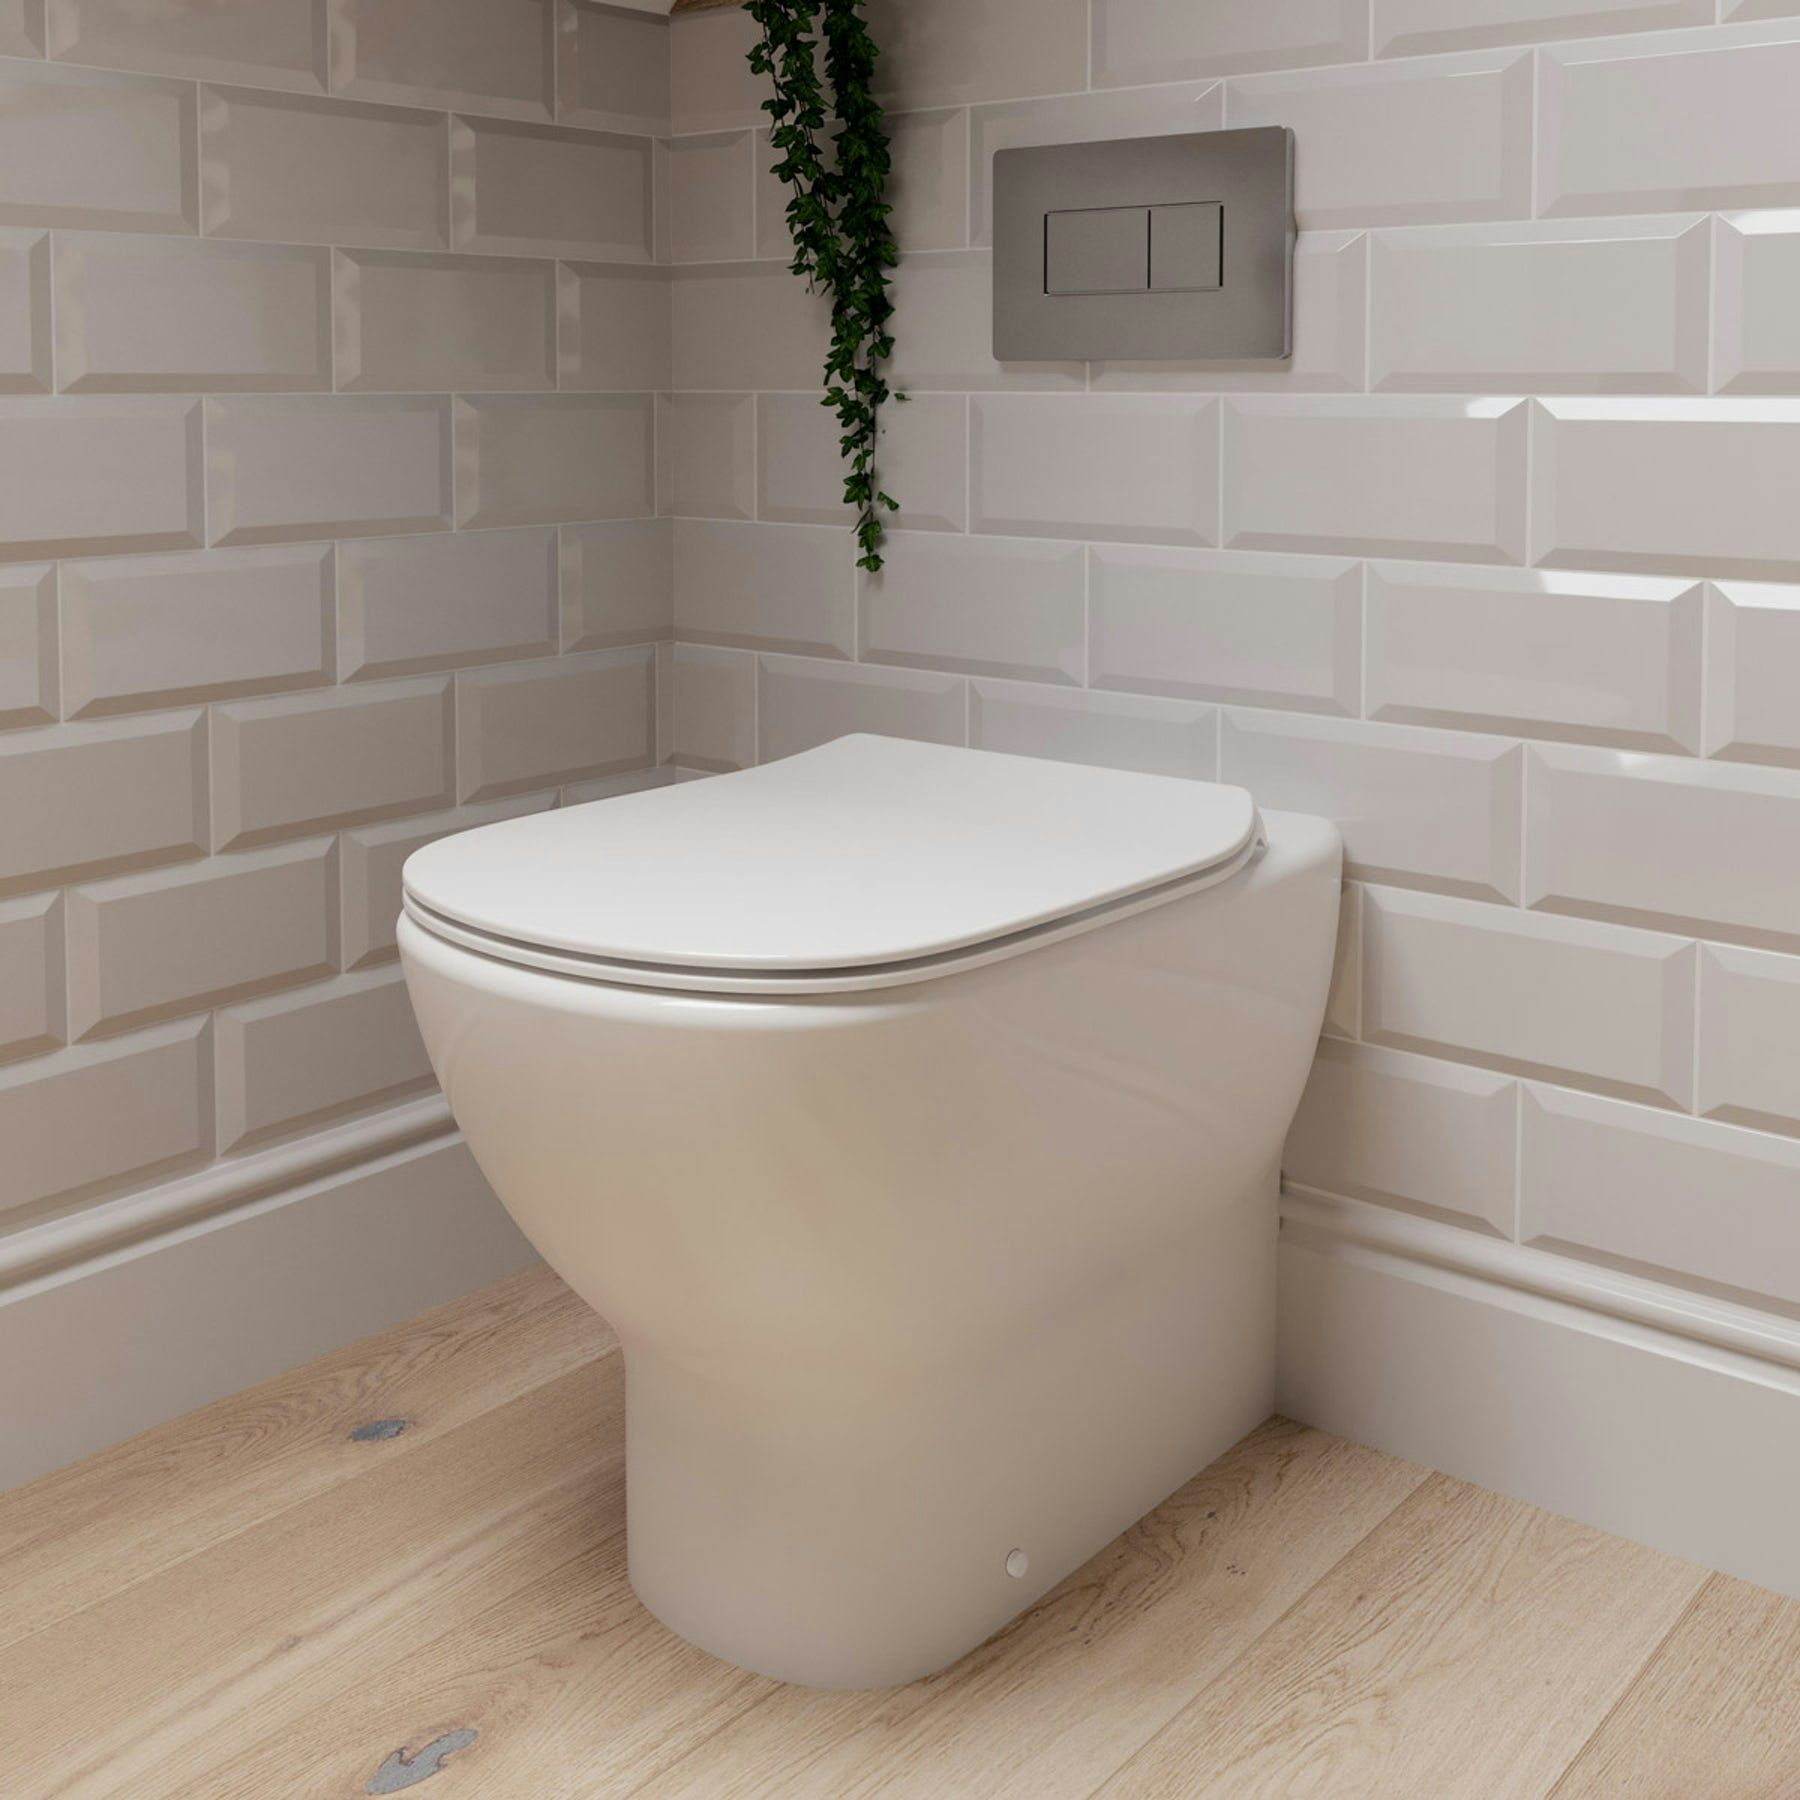 Ideal Standard Tesi back to wall toilet with Aquablade, soft close seat, concealed cistern and